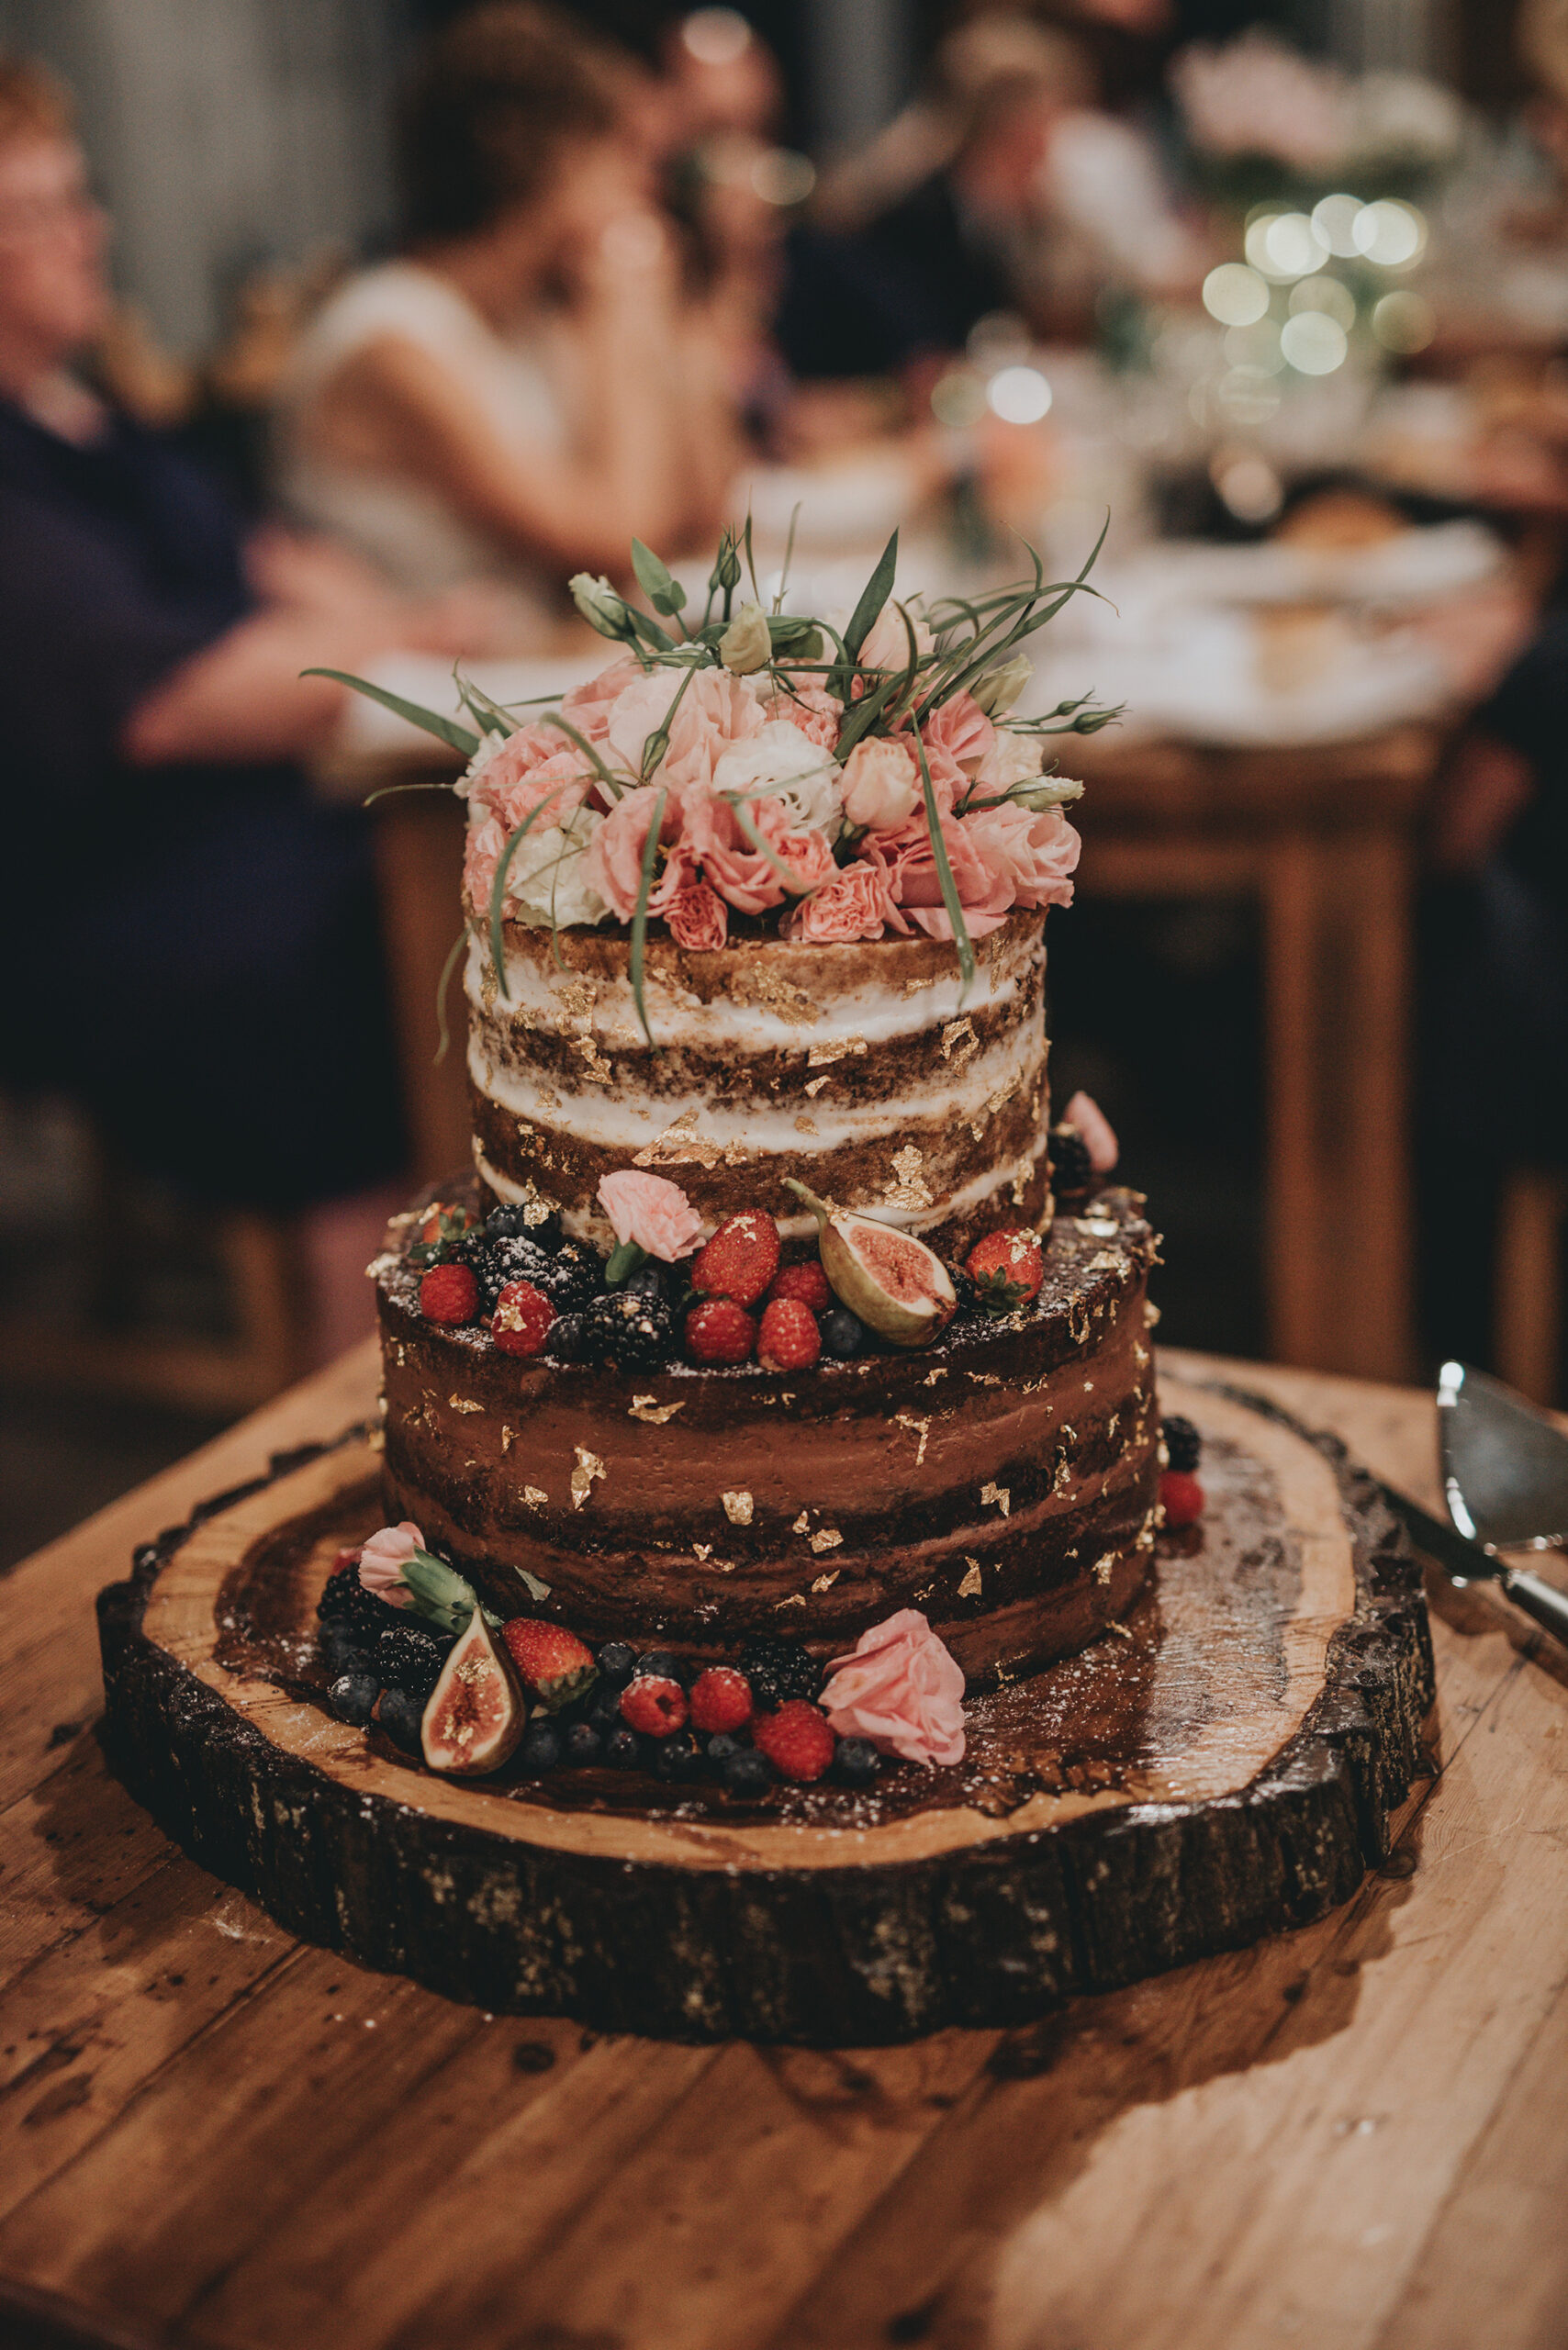 Kate_Tristan_Country-Rustic-Wedding_053